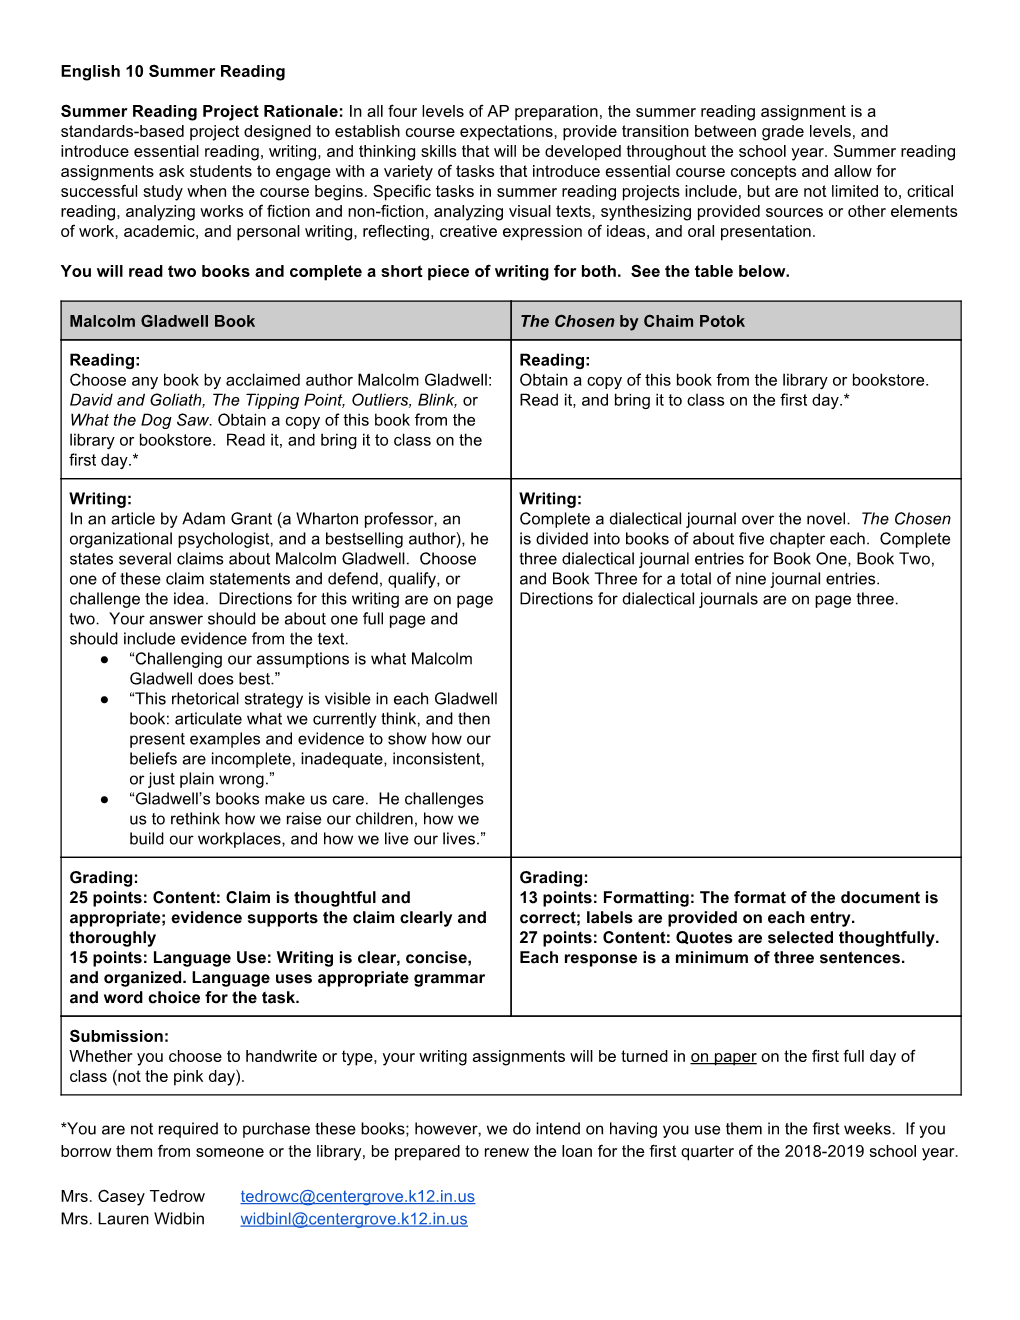 English 10 Summer Reading Summer Reading Project Rationale:​In All Four Levels of AP Preparation, the Summer Reading Assignmen